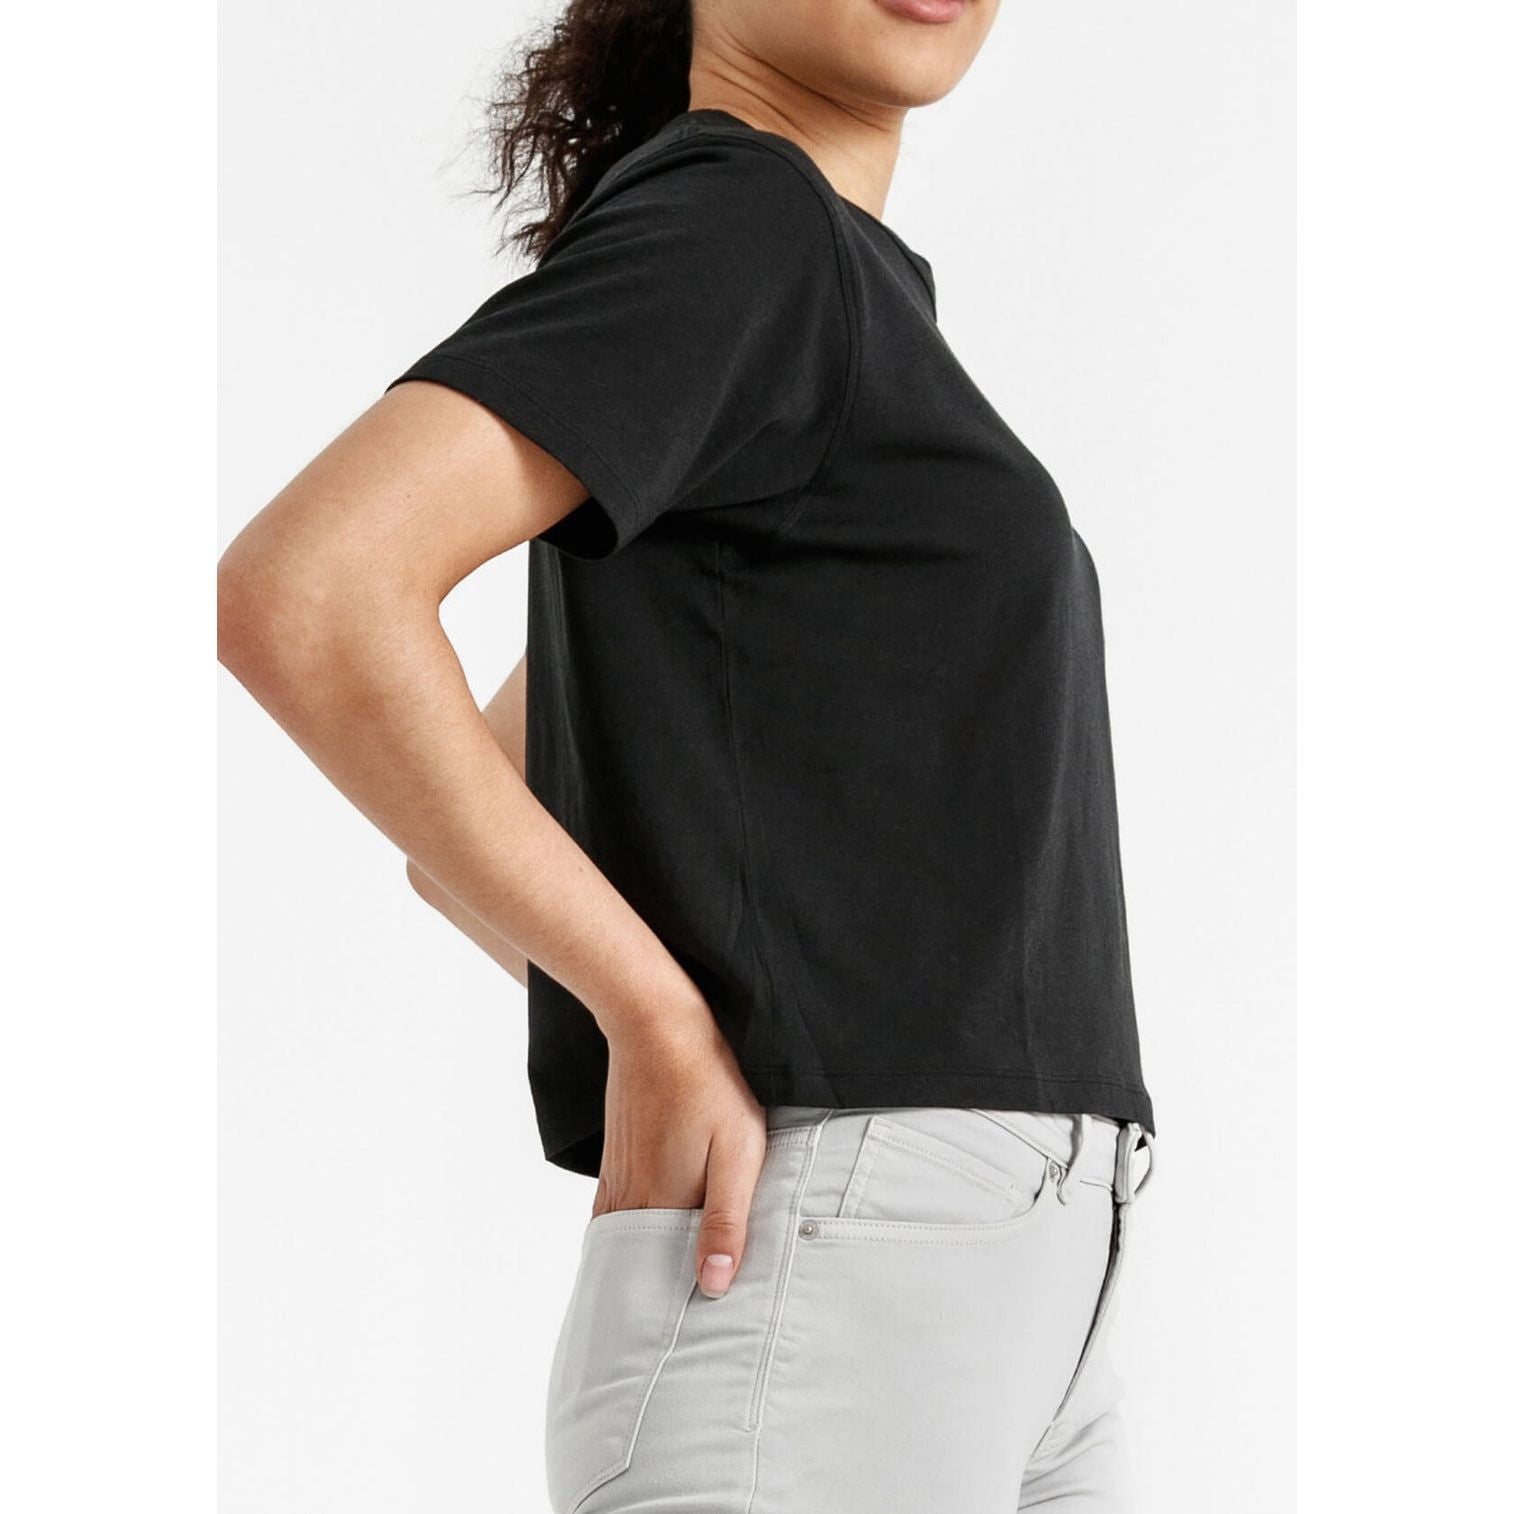 The Only Tee Crop pour Femmes||The Only Tee Crop Women's